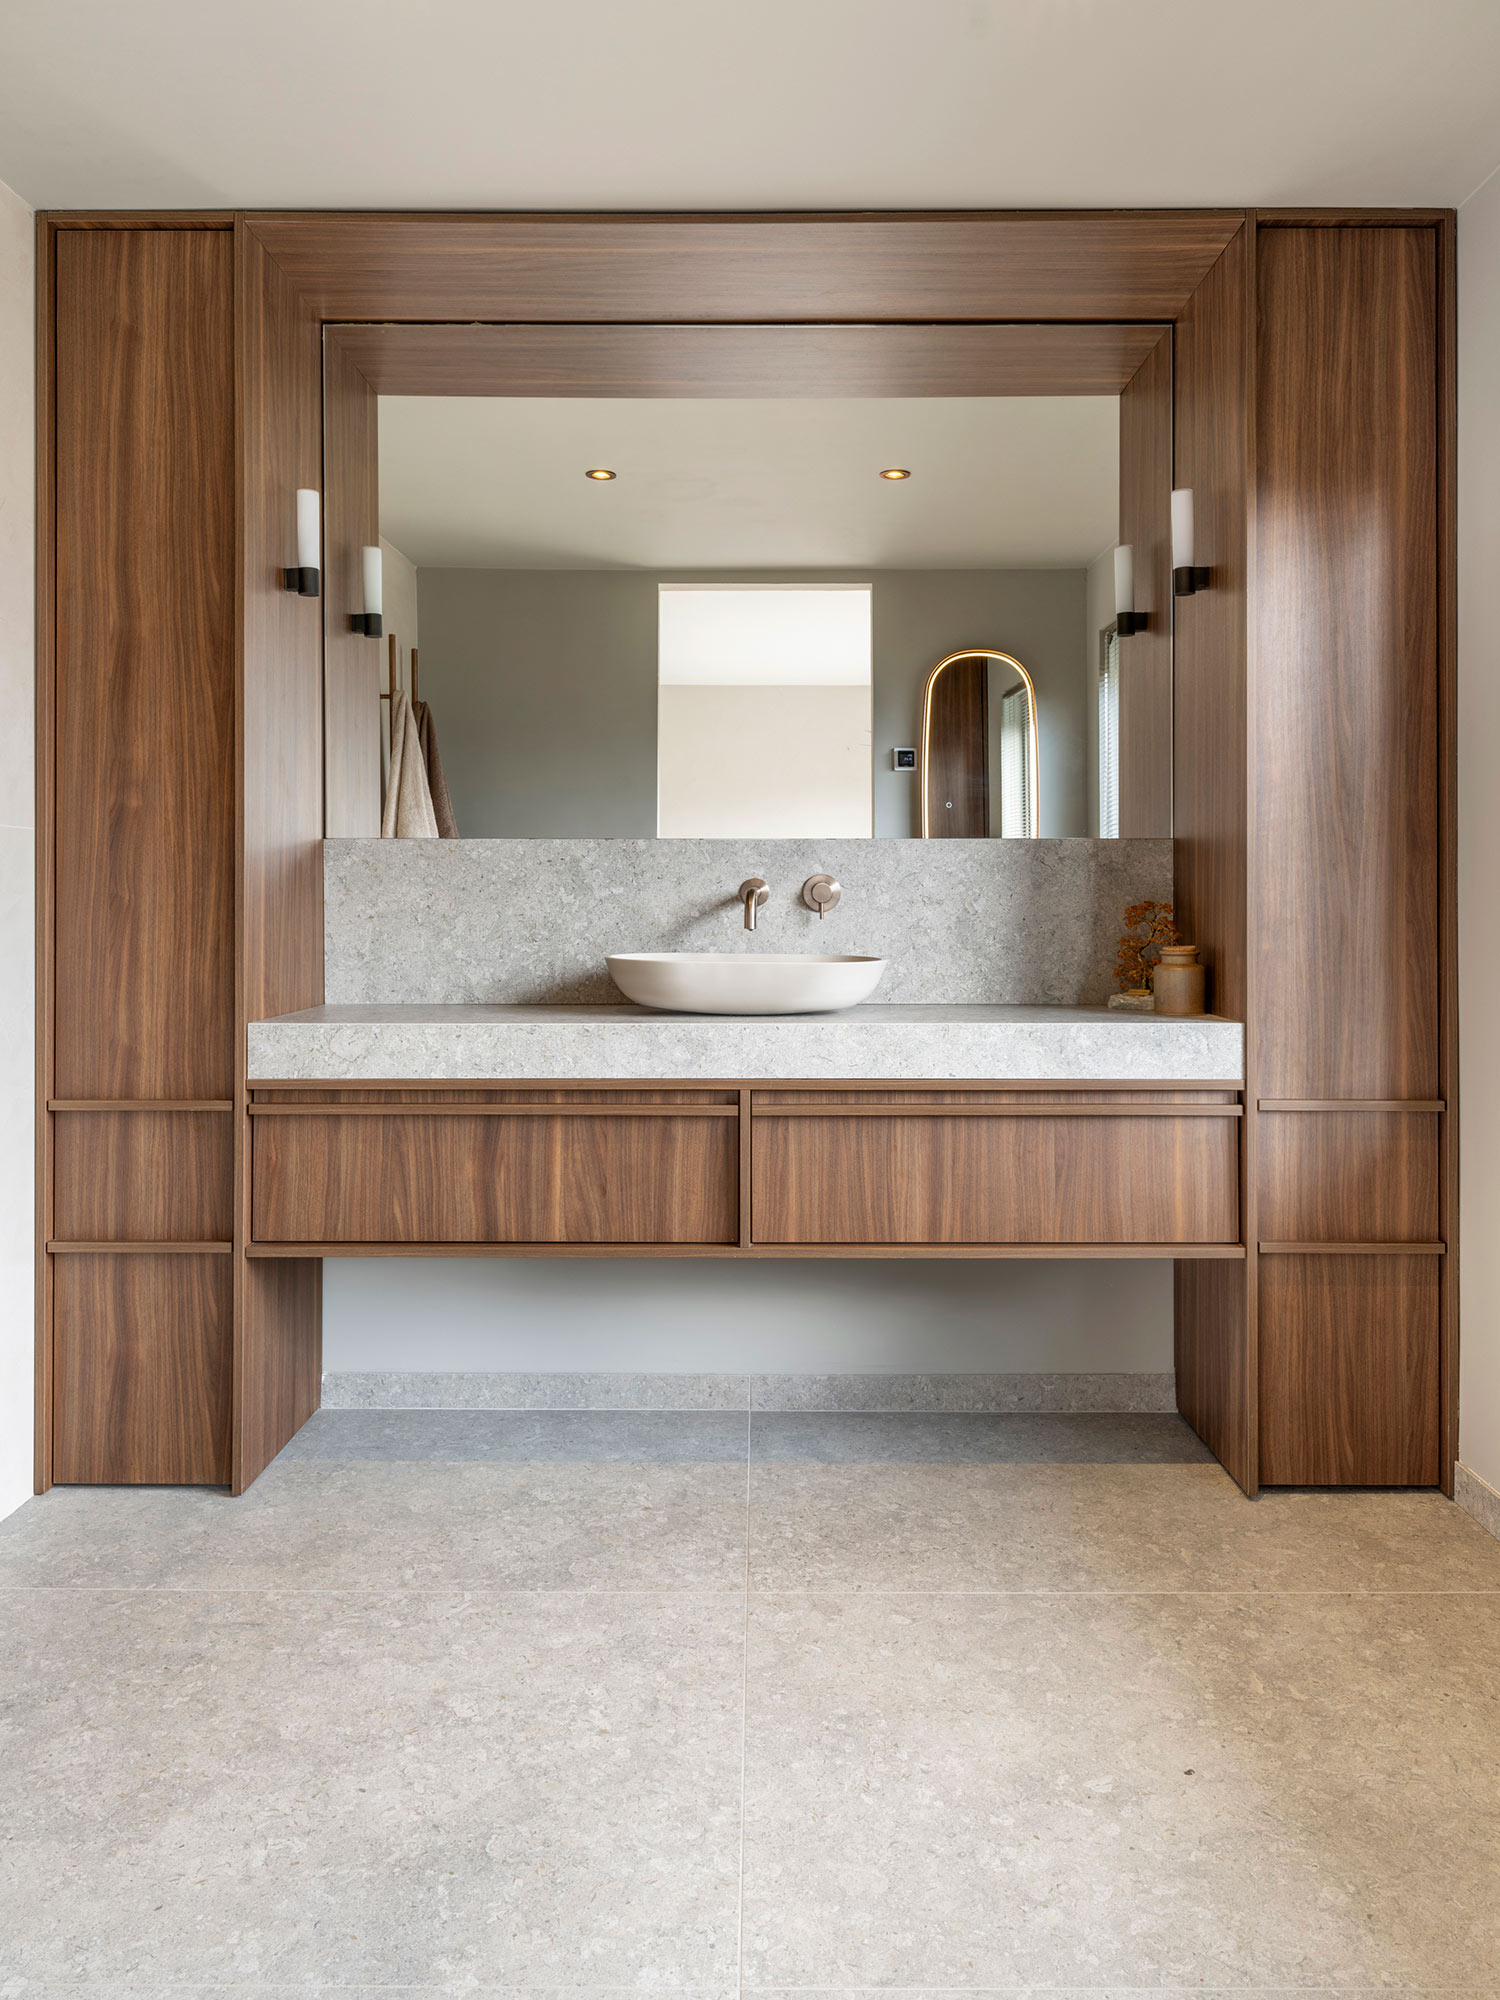 Image of Bathroom Kenisur 1 in Cosentino partners with two designers in Malaysia to showcase the versatility of Dekton Pietra Kode and its use beyond the kitchen - Cosentino